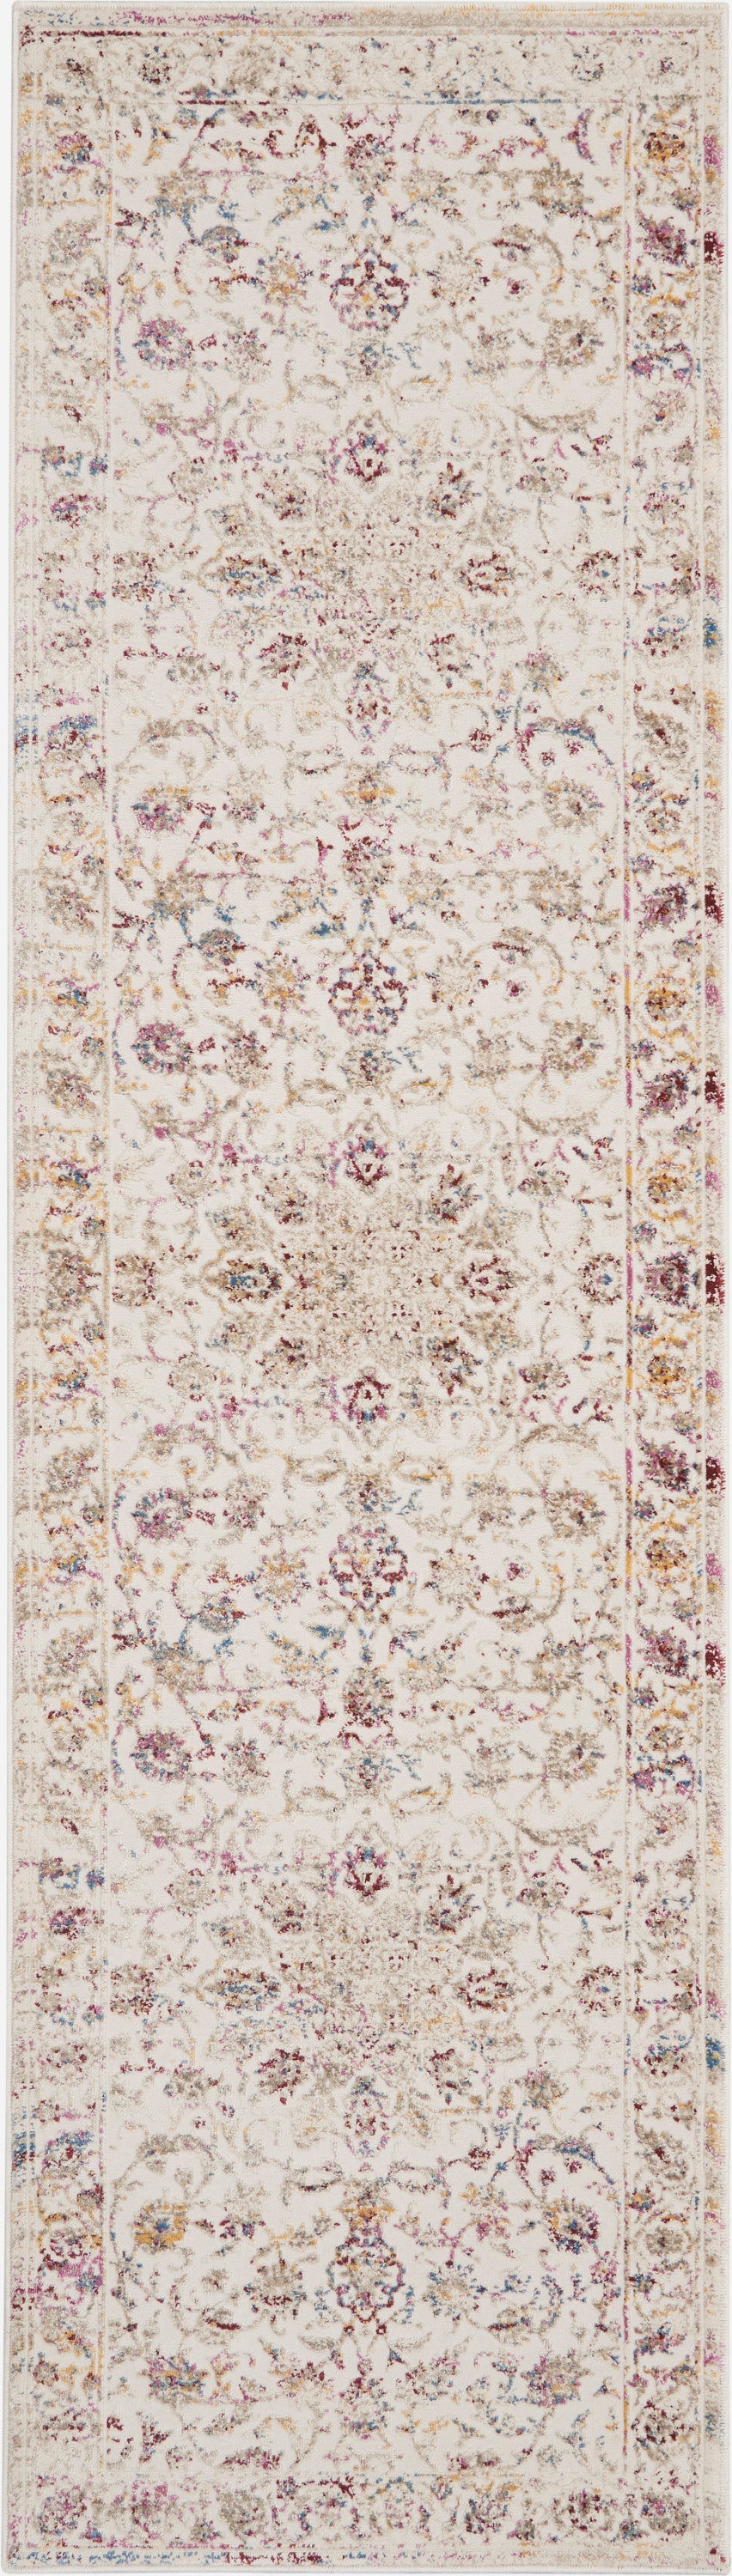 Nourison Home Melody MEL02 Ivory Multi Traditional Machinemade Rug